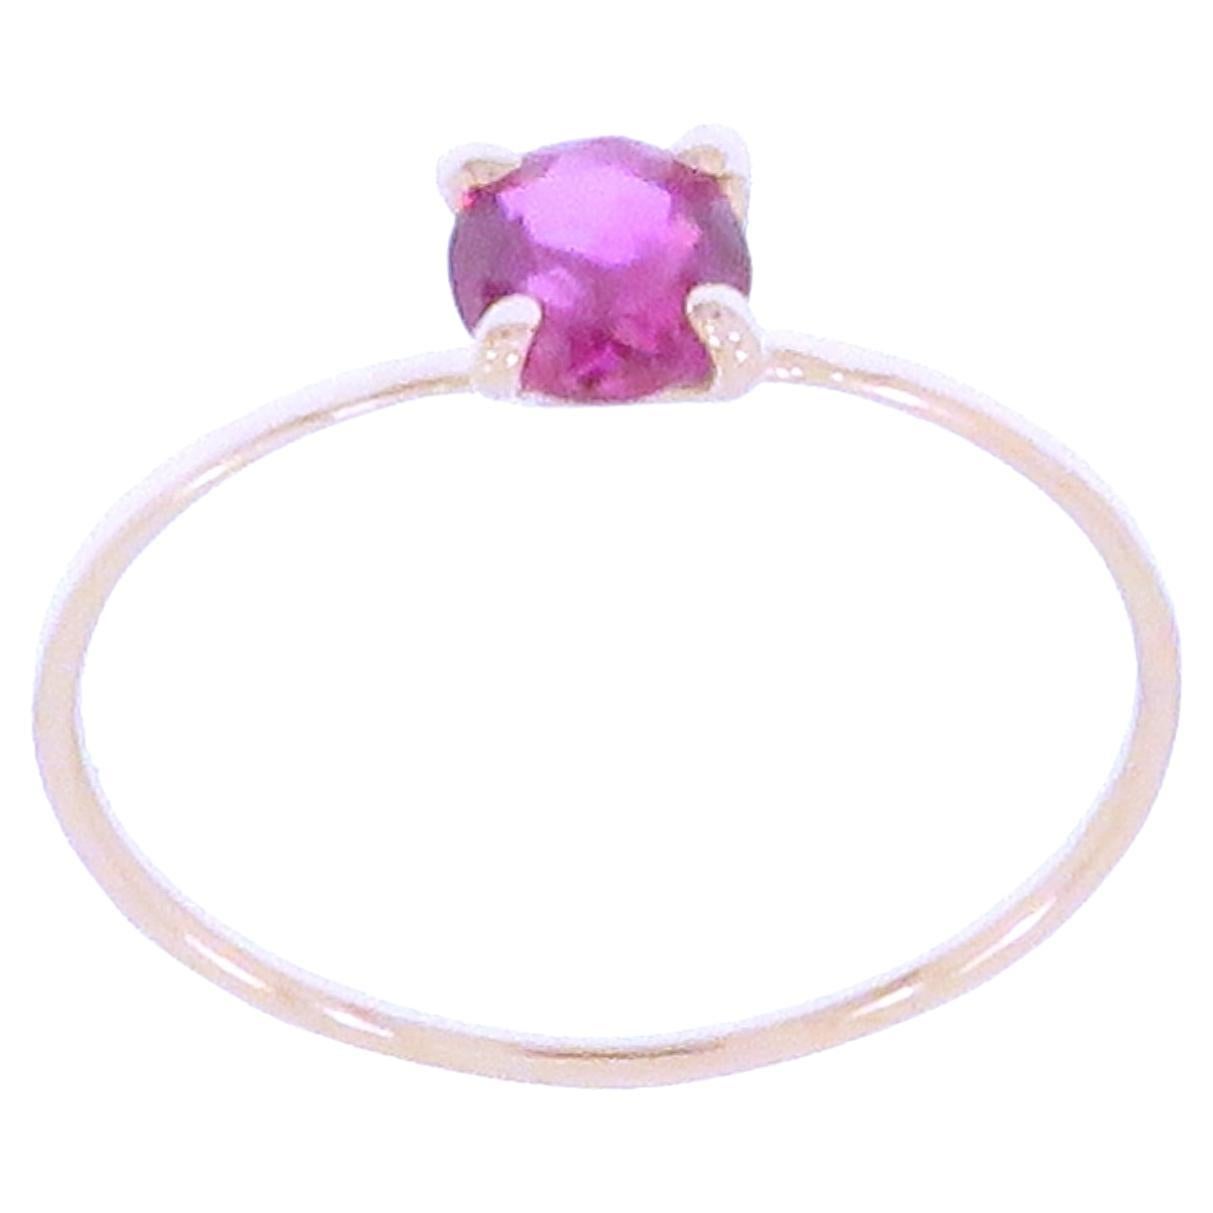 Brilliant Cut Ruby 18 Karat White Gold Ring Handcrafted in Italy For Sale